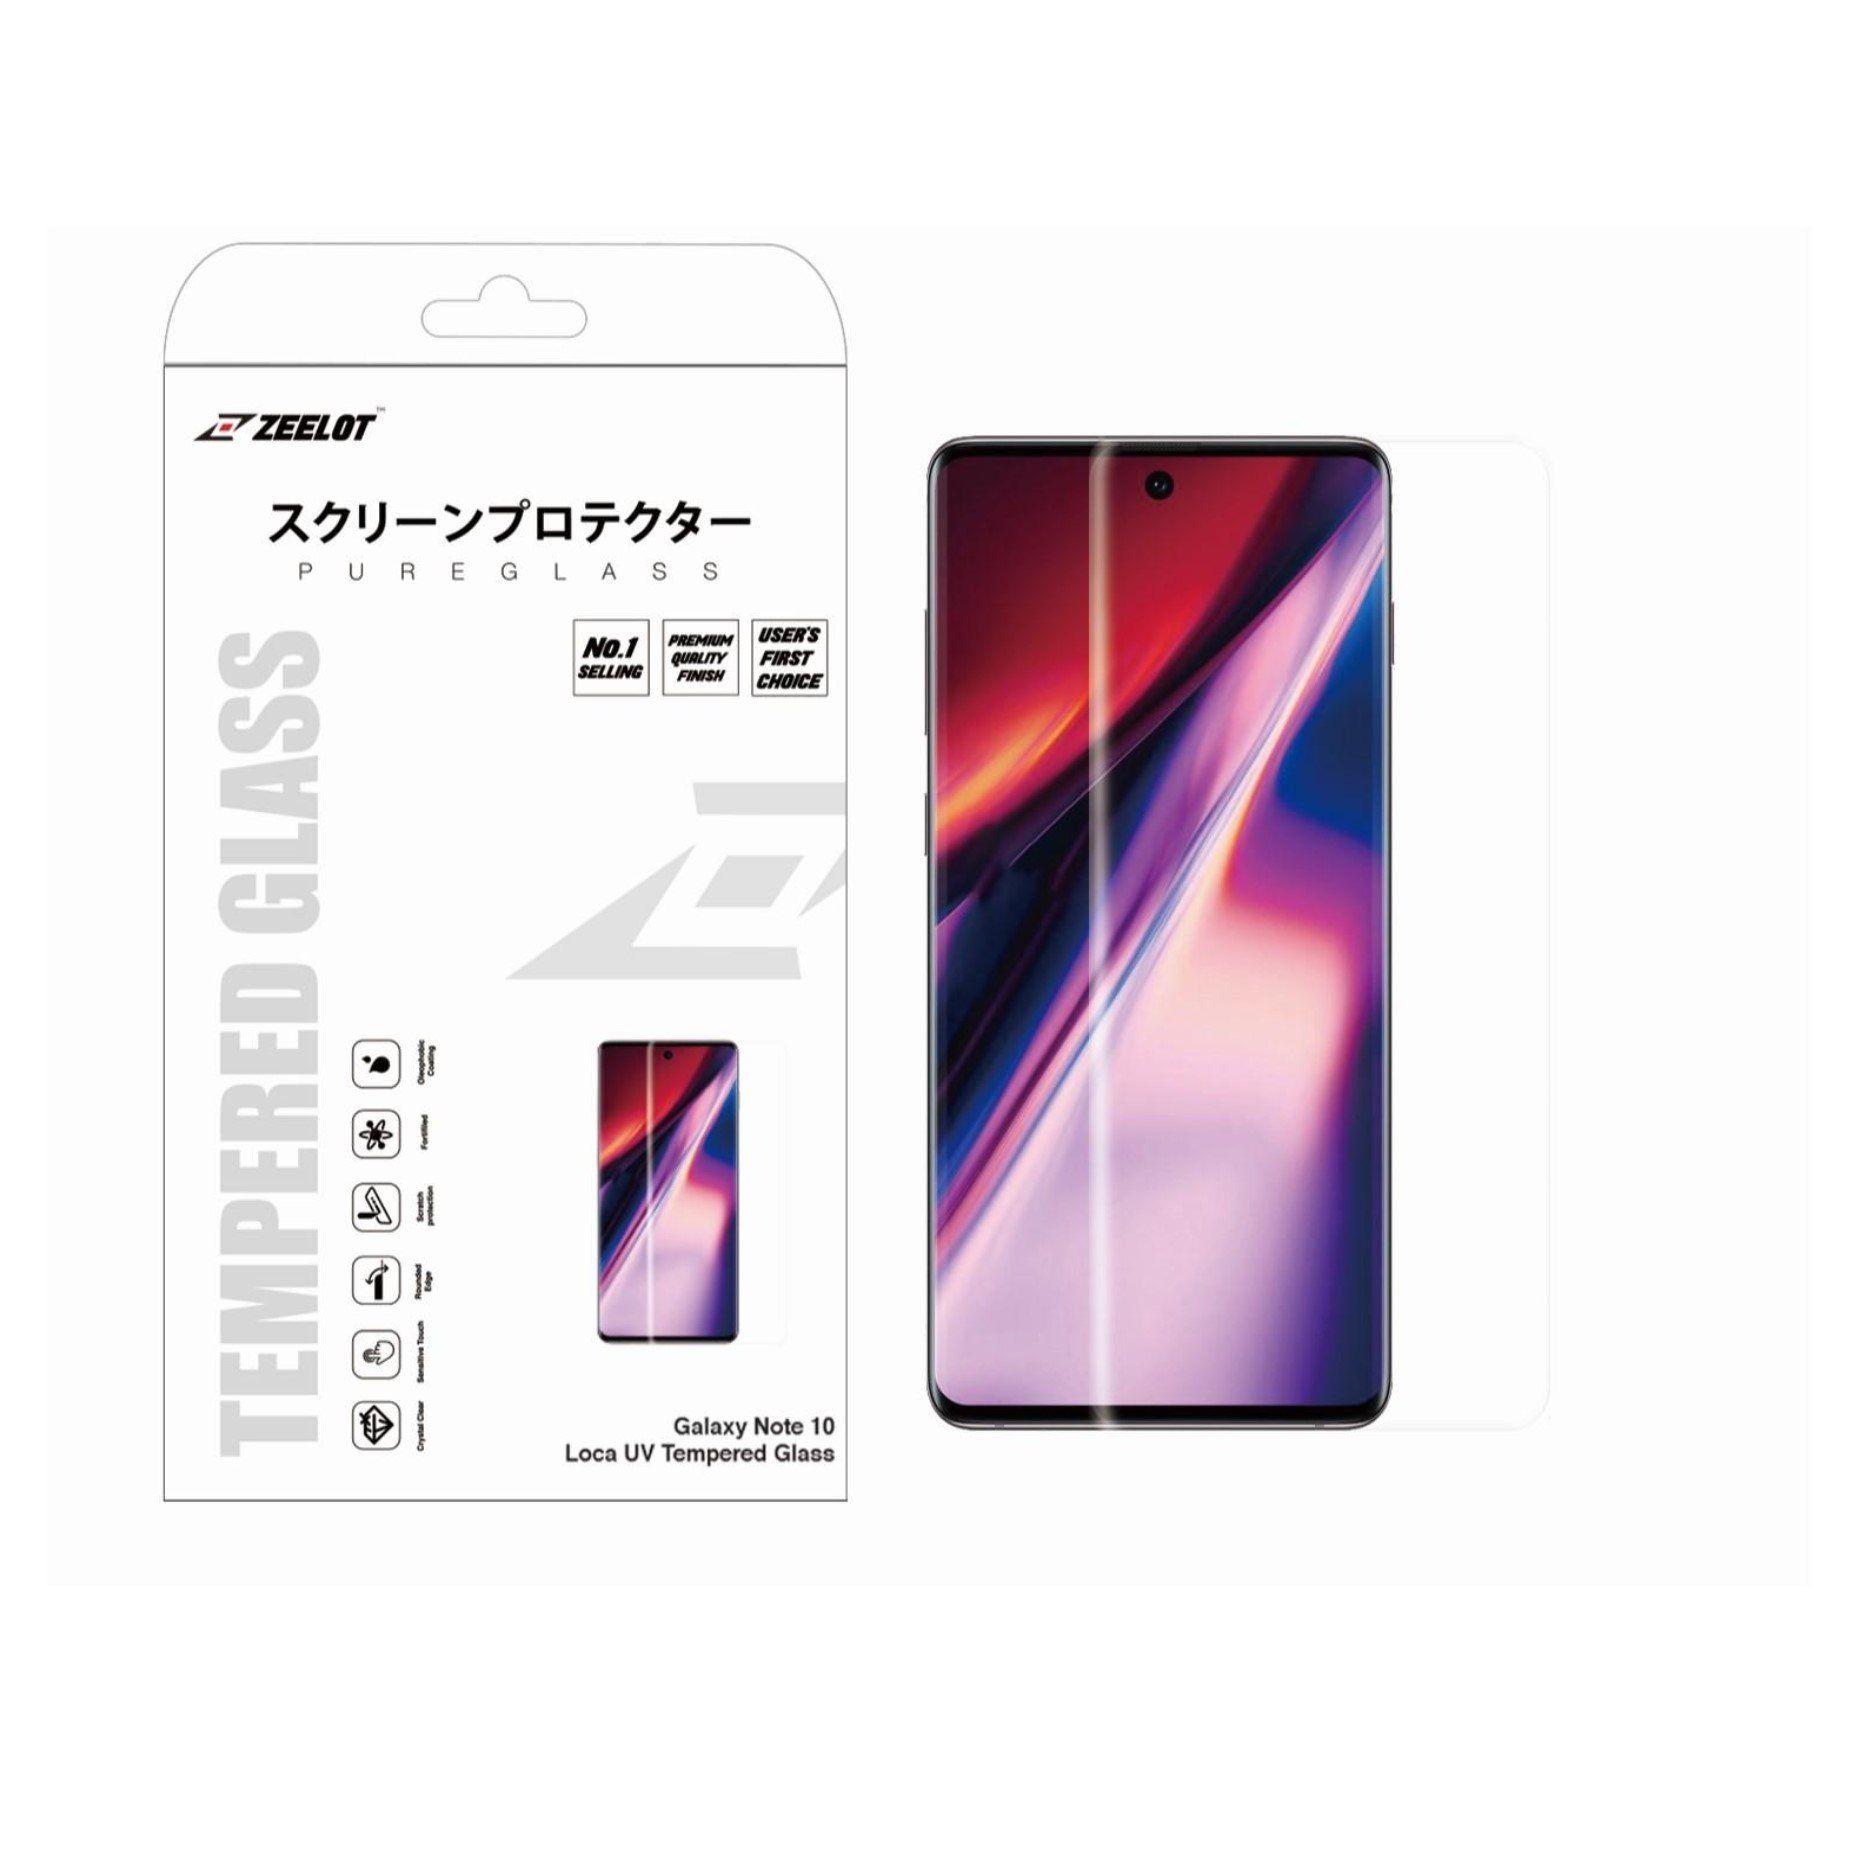 ZEELOT PureGlass 3D Clear LOCA Tempered Glass Screen Protector for Samsung Galaxy Note 10 Plus LOCA Tempered Glass Zeelot 